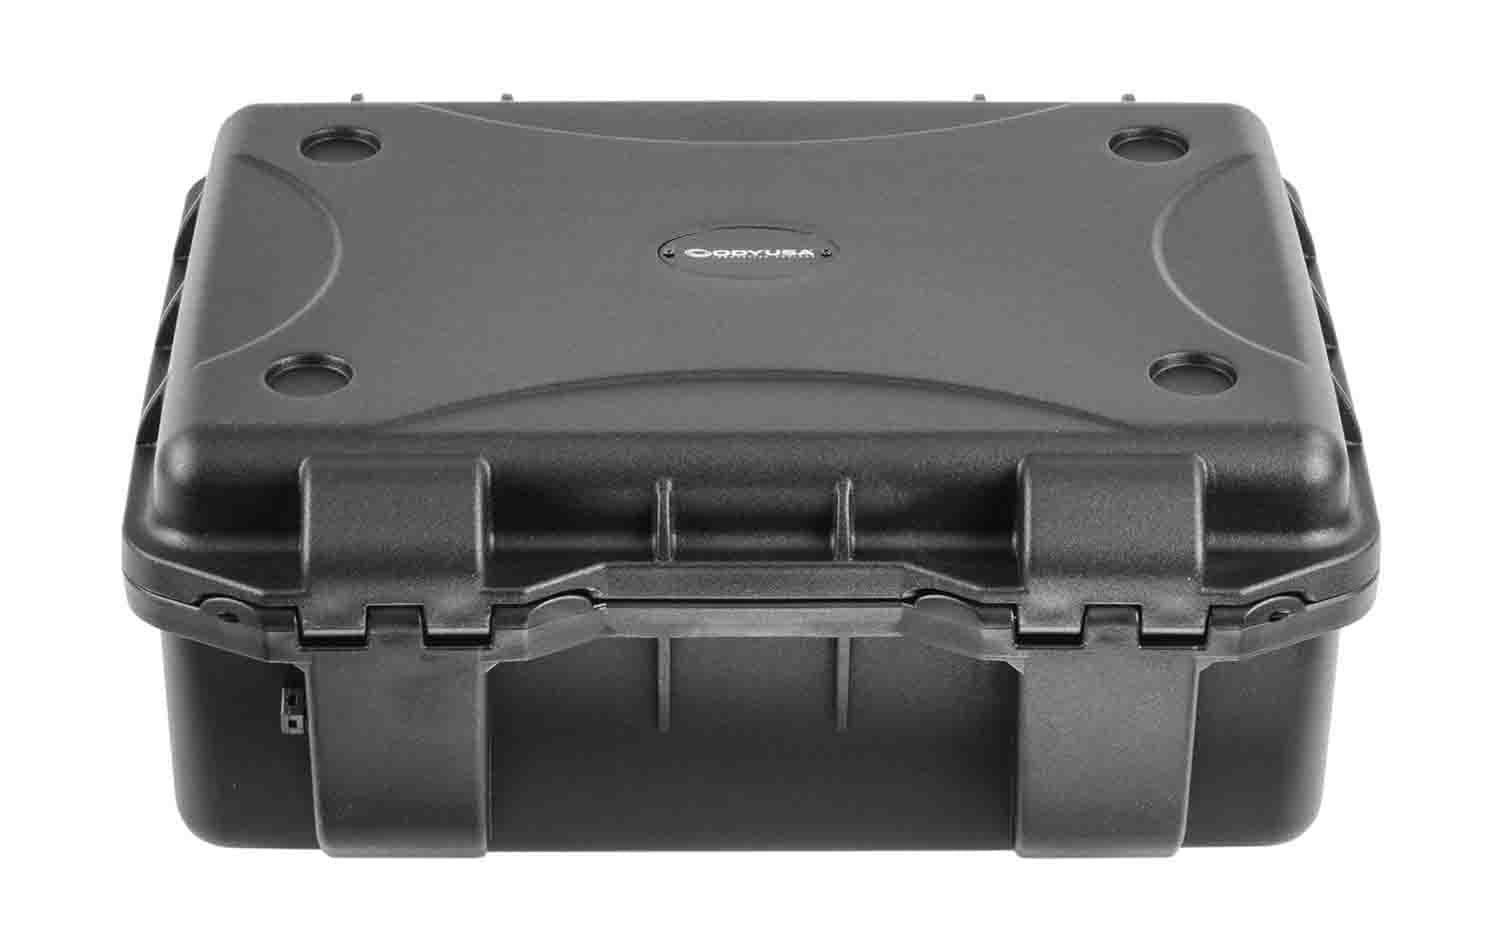 Odyssey VU151006 Vulcan Injection-Molded Utility Case with Pluck Foam - 15.25 x 10.5 x 4" Interior - Hollywood DJ